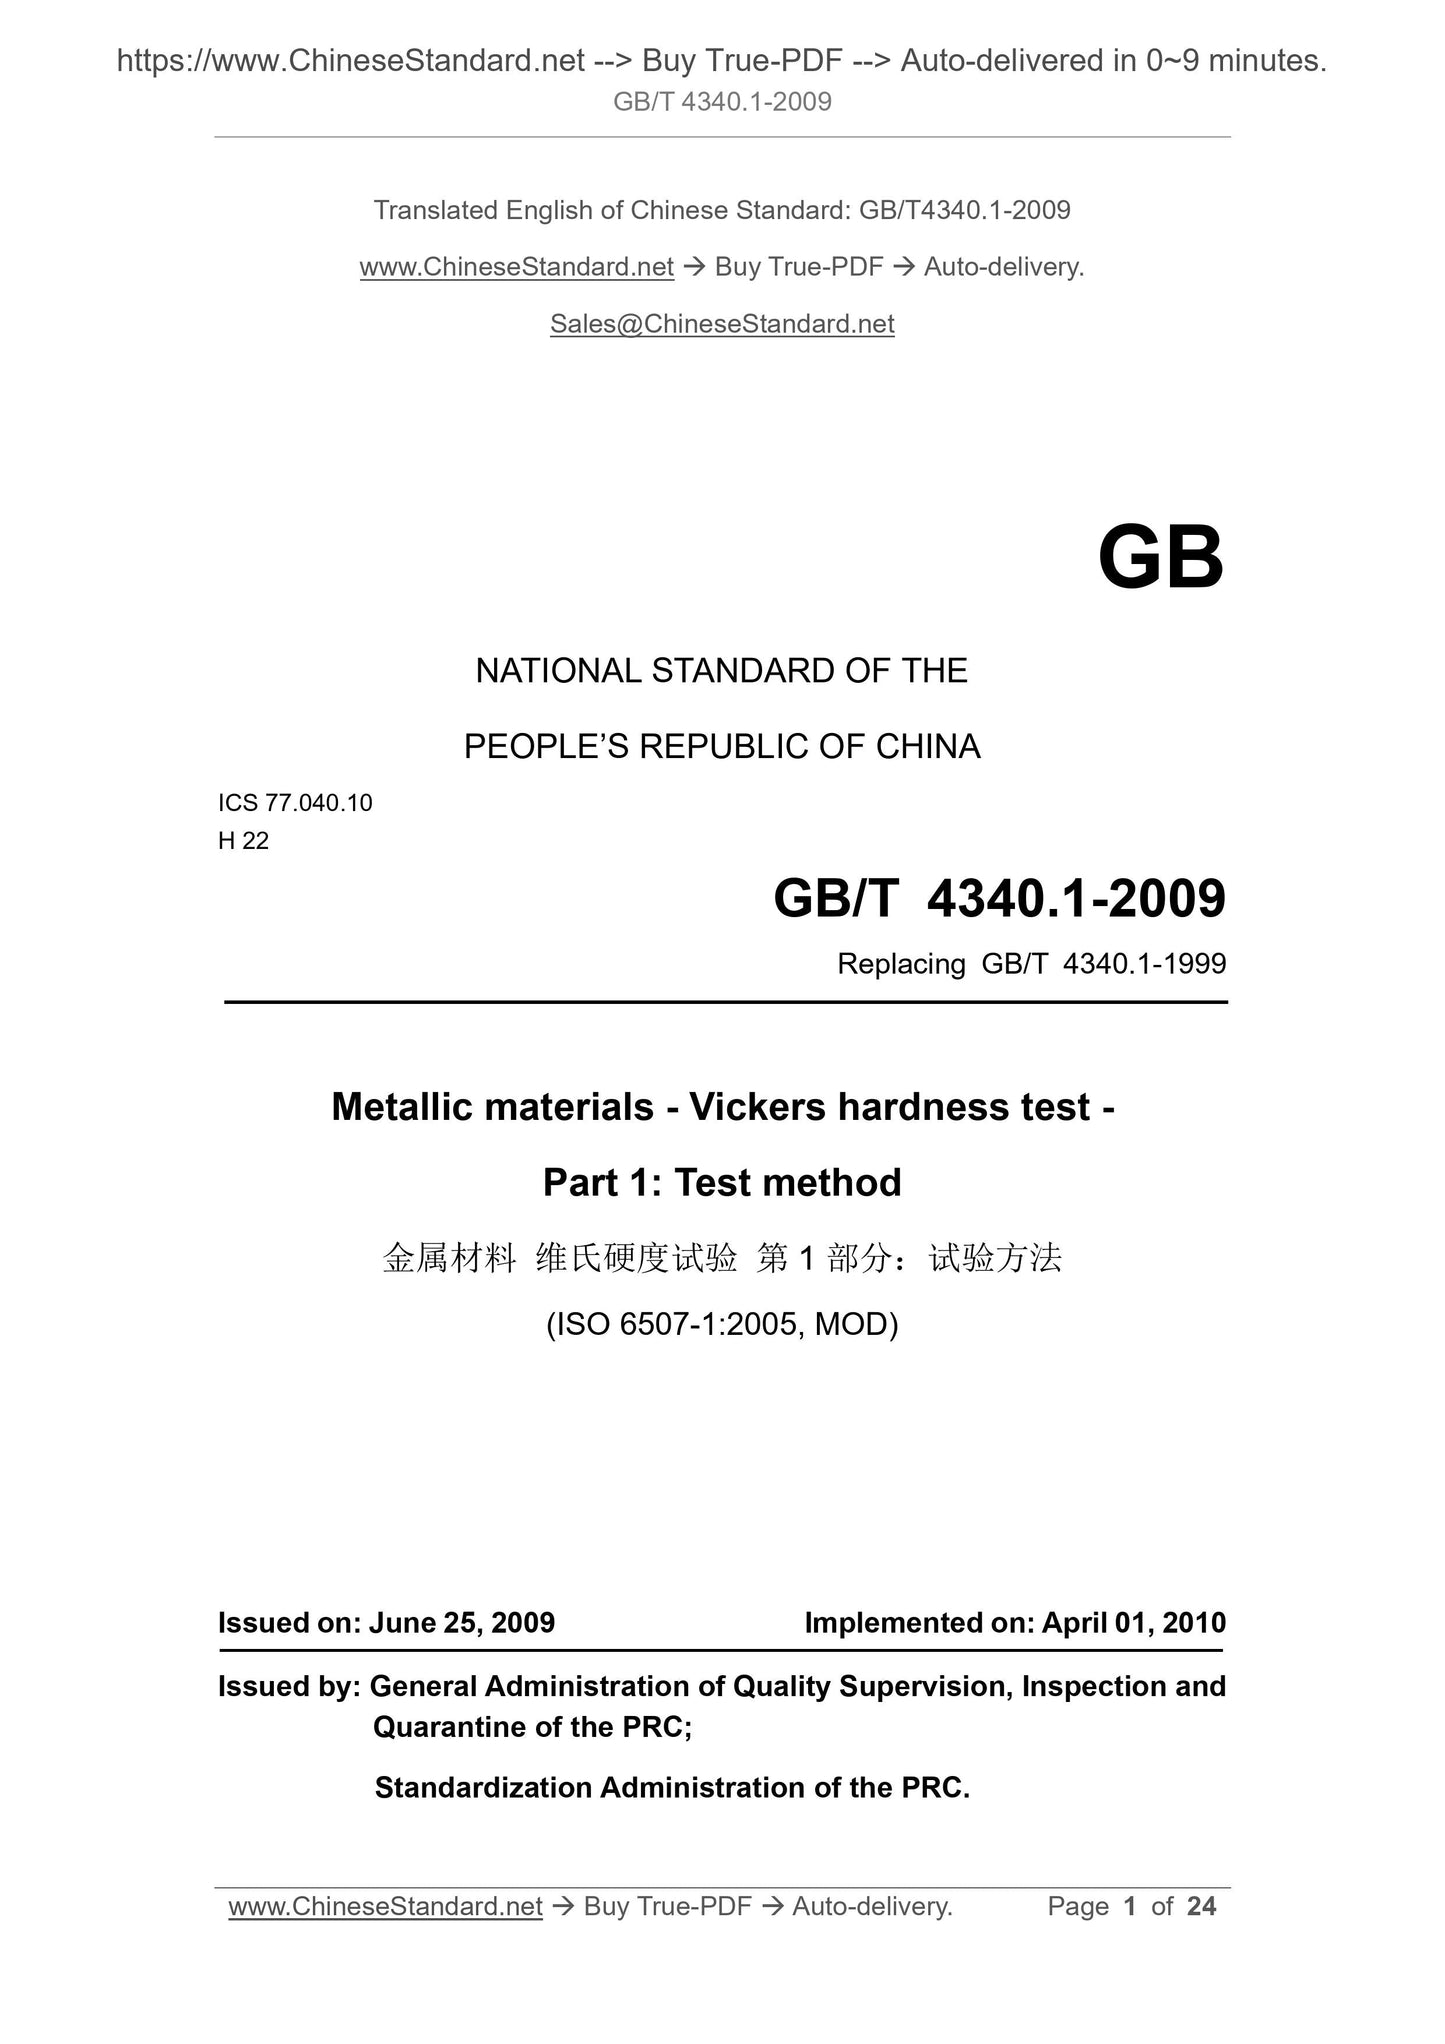 GB/T 4340.1-2009 Page 1